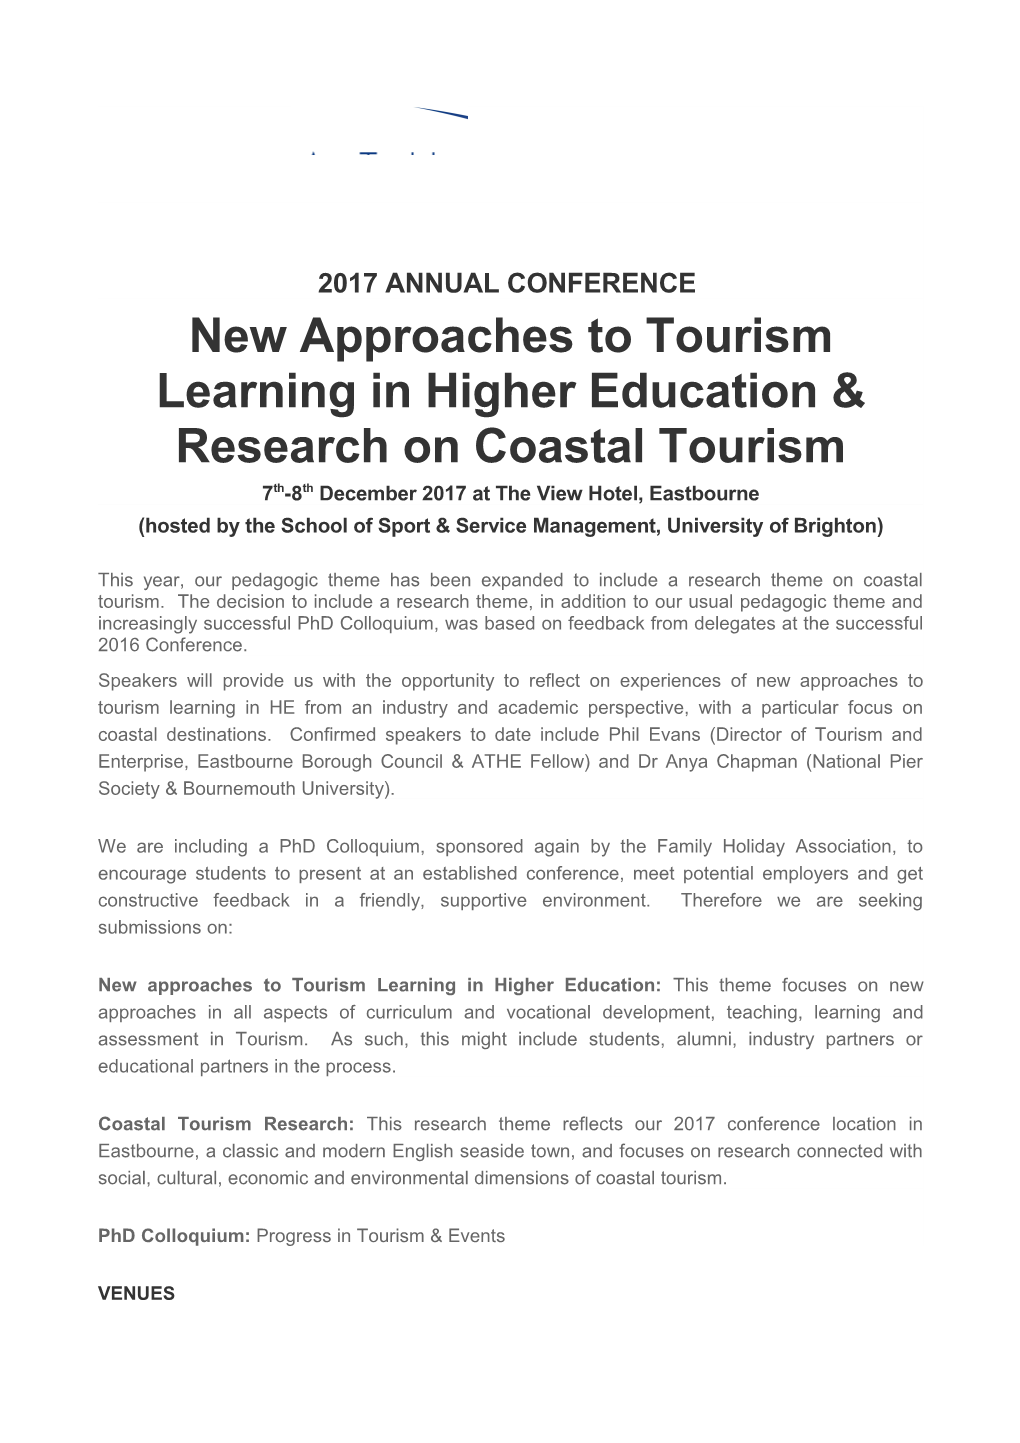 New Approaches to Tourism Learning in Higher Education & Research on Coastal Tourism